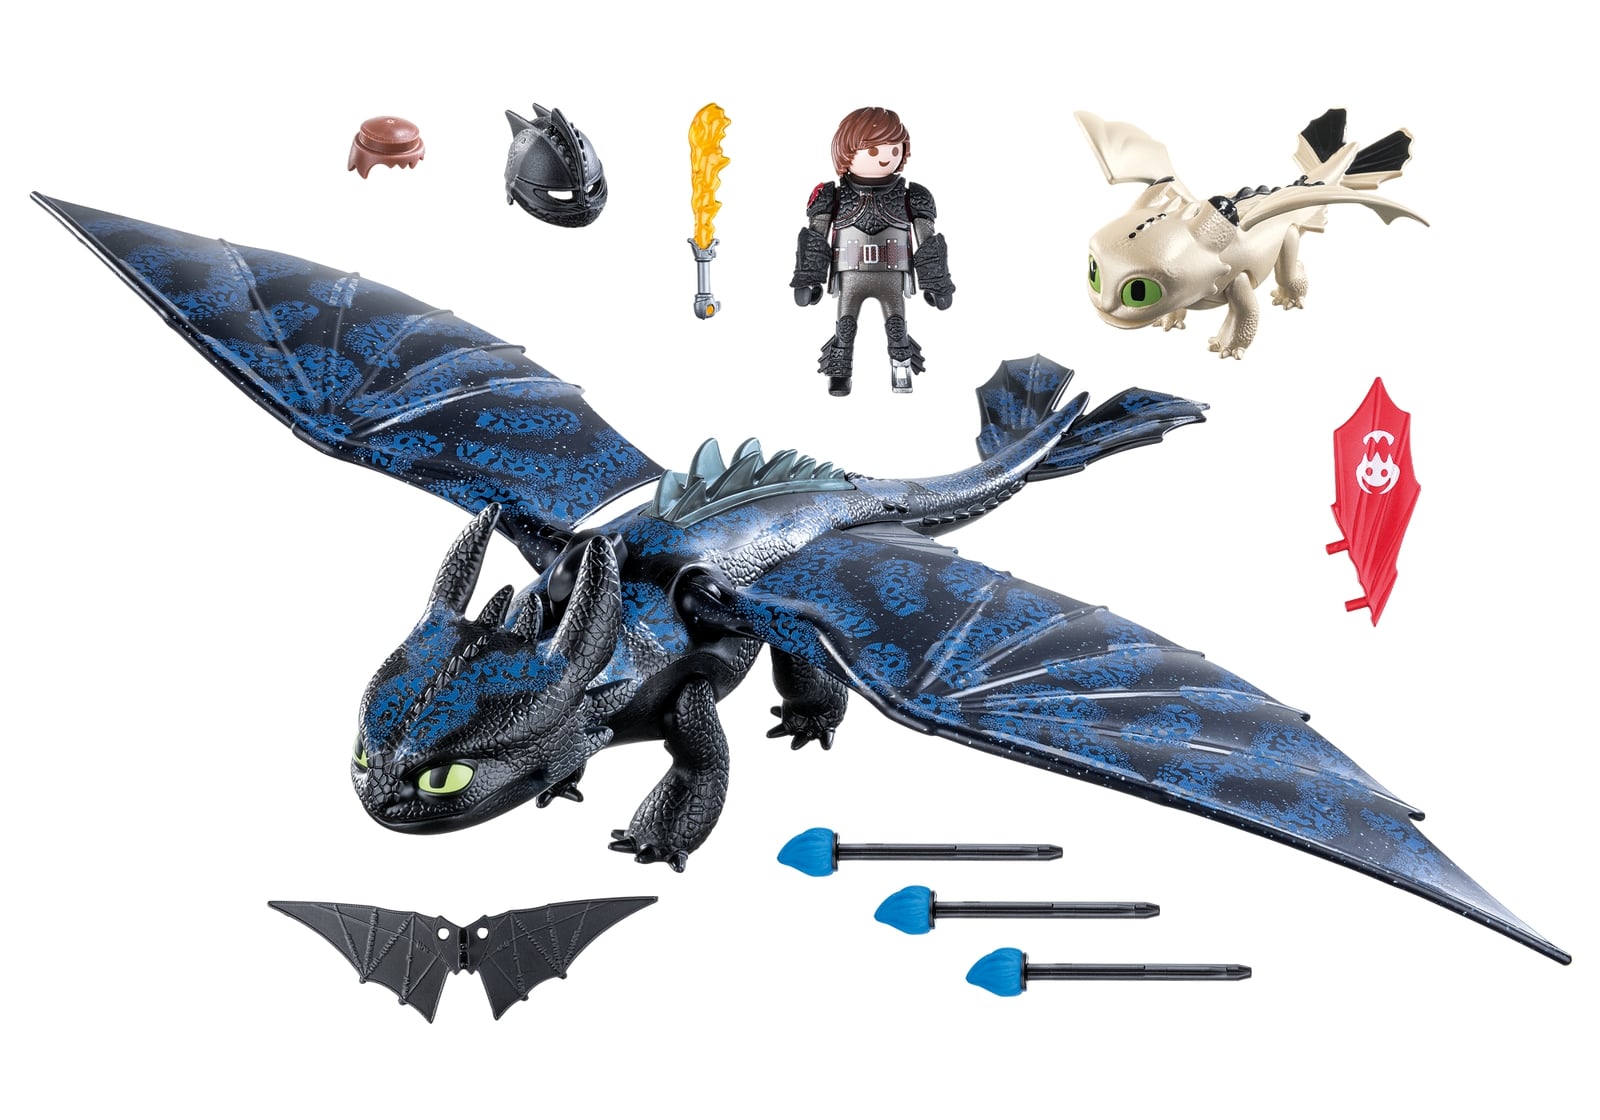 Hiccup, Toothless Si Pui De Dragon